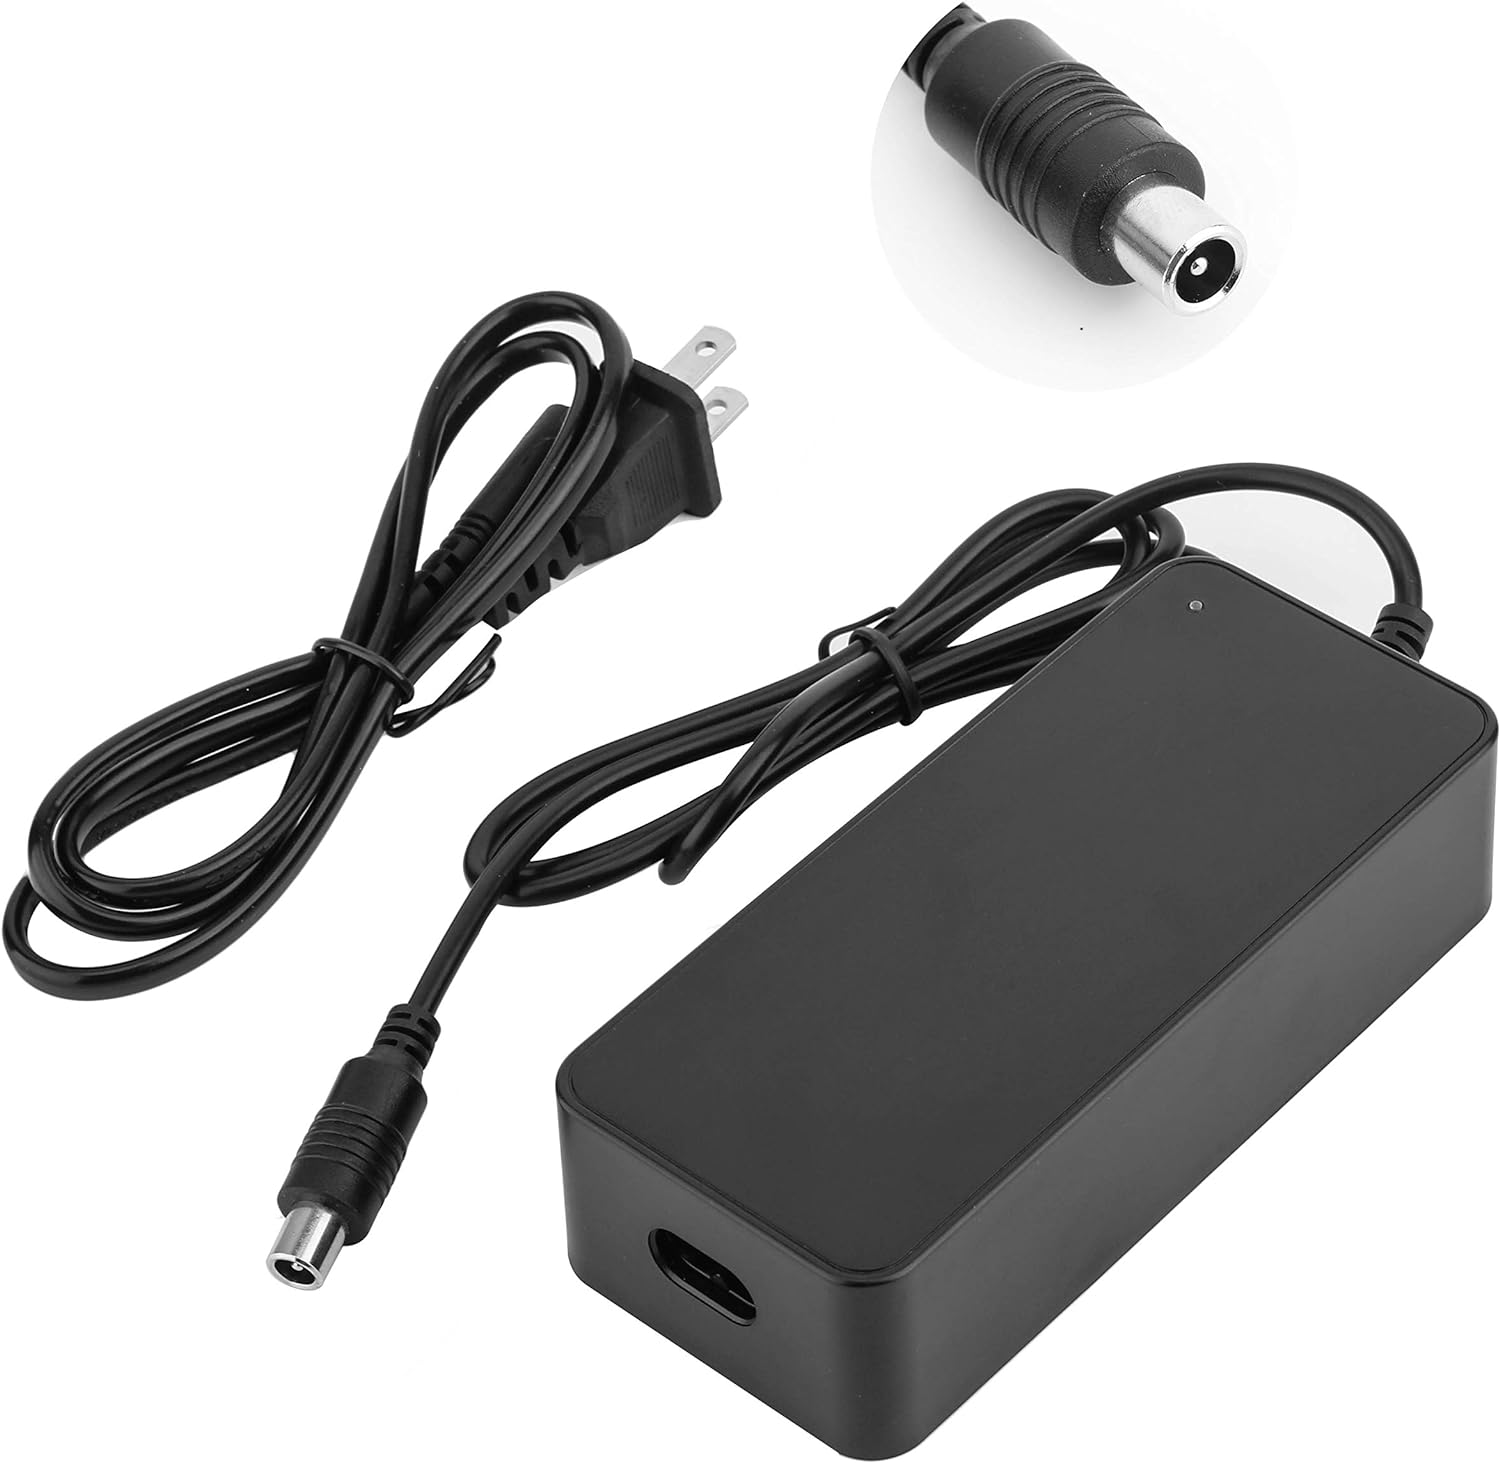 42V 2A (84W) Power Adapter for Lime Scooter Chargers for Ninebot G30LP ES2 ES4 ES1L F20 F30 F40 E22